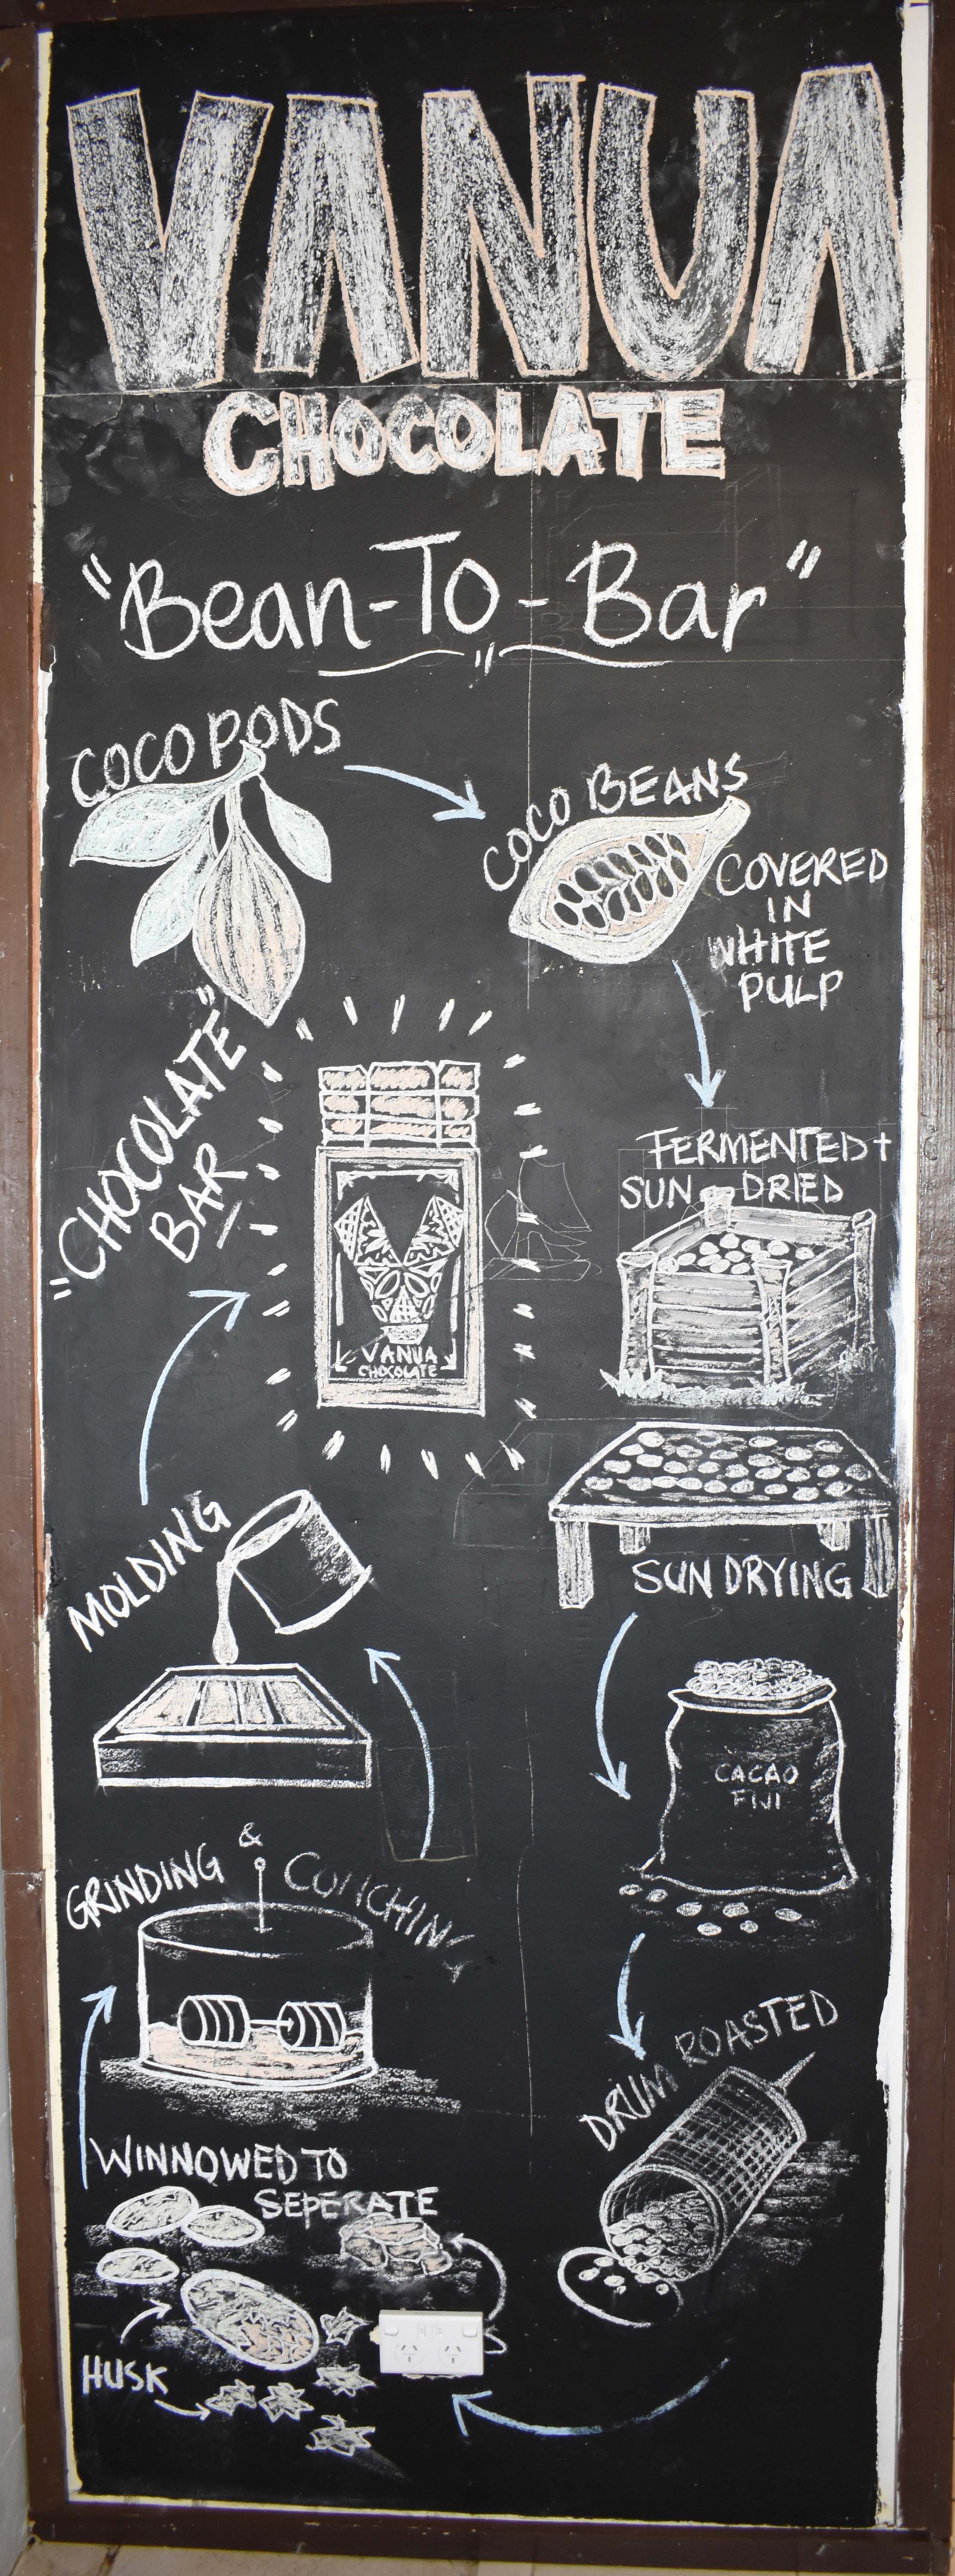 Black board with chocolate making process